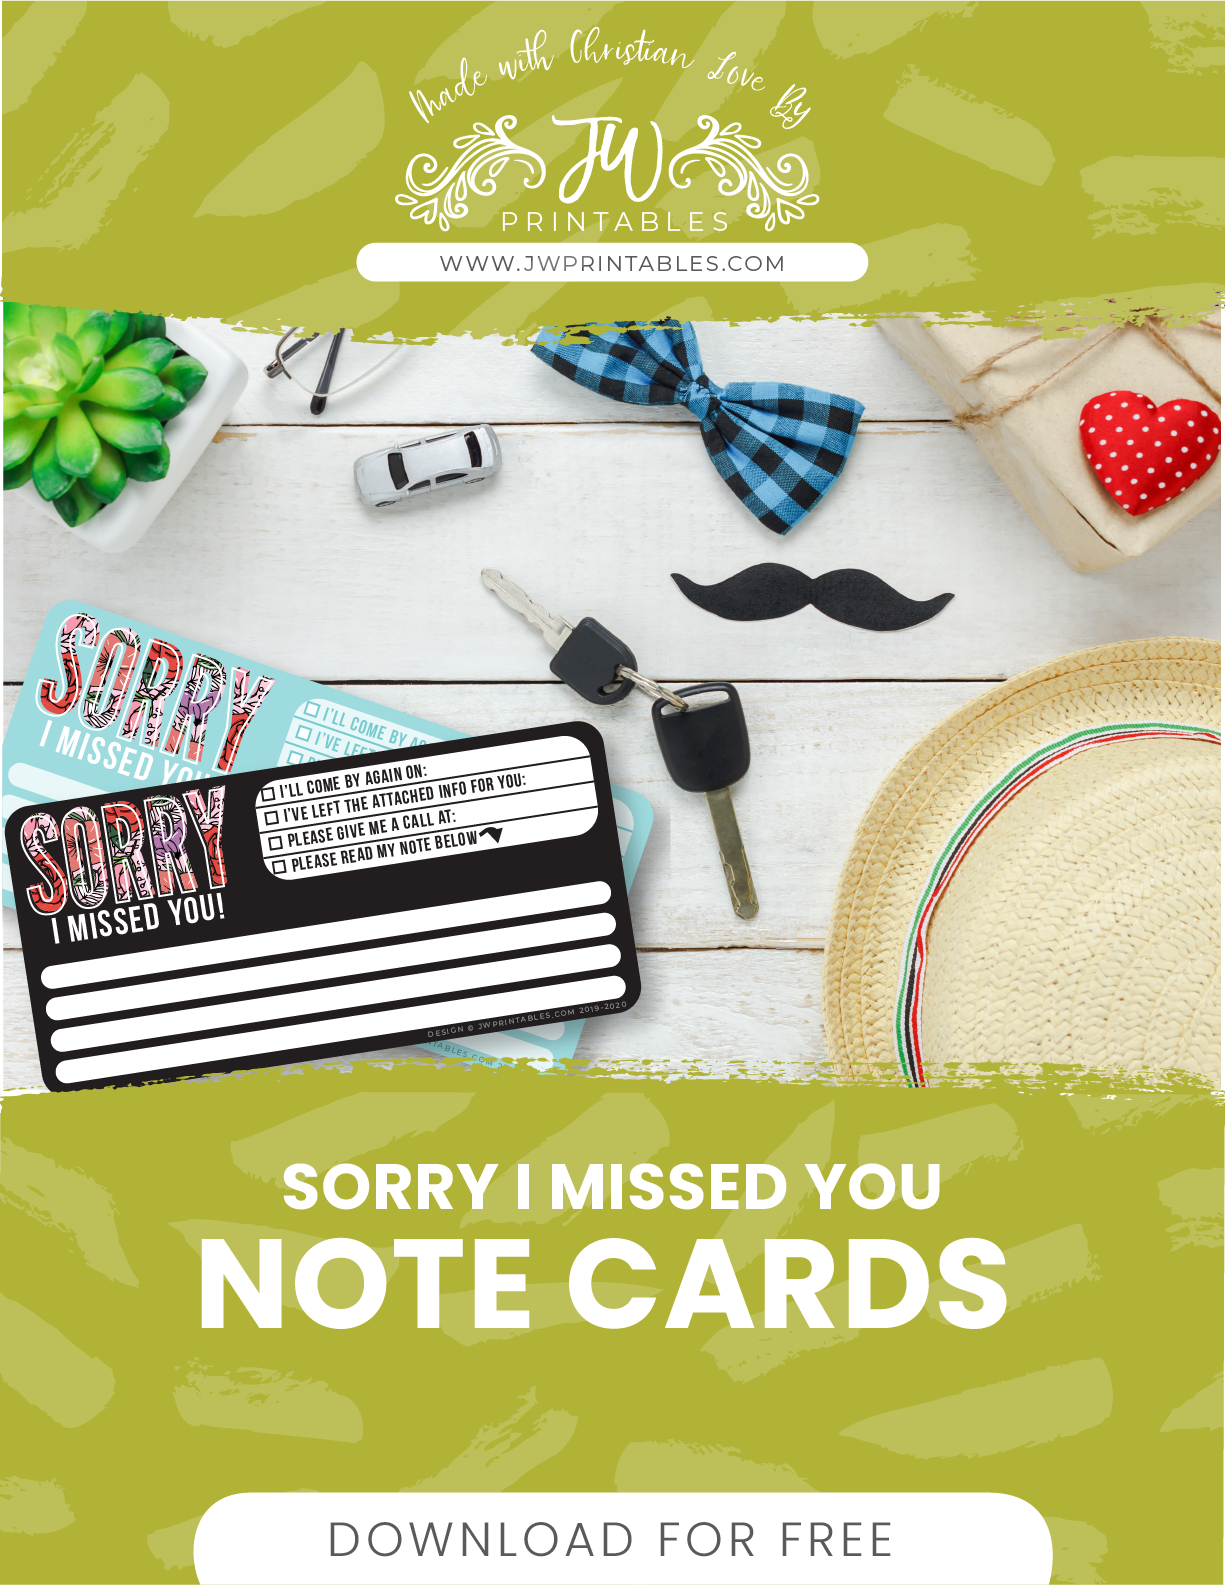 sorry-i-missed-you-note-card-jw-printables